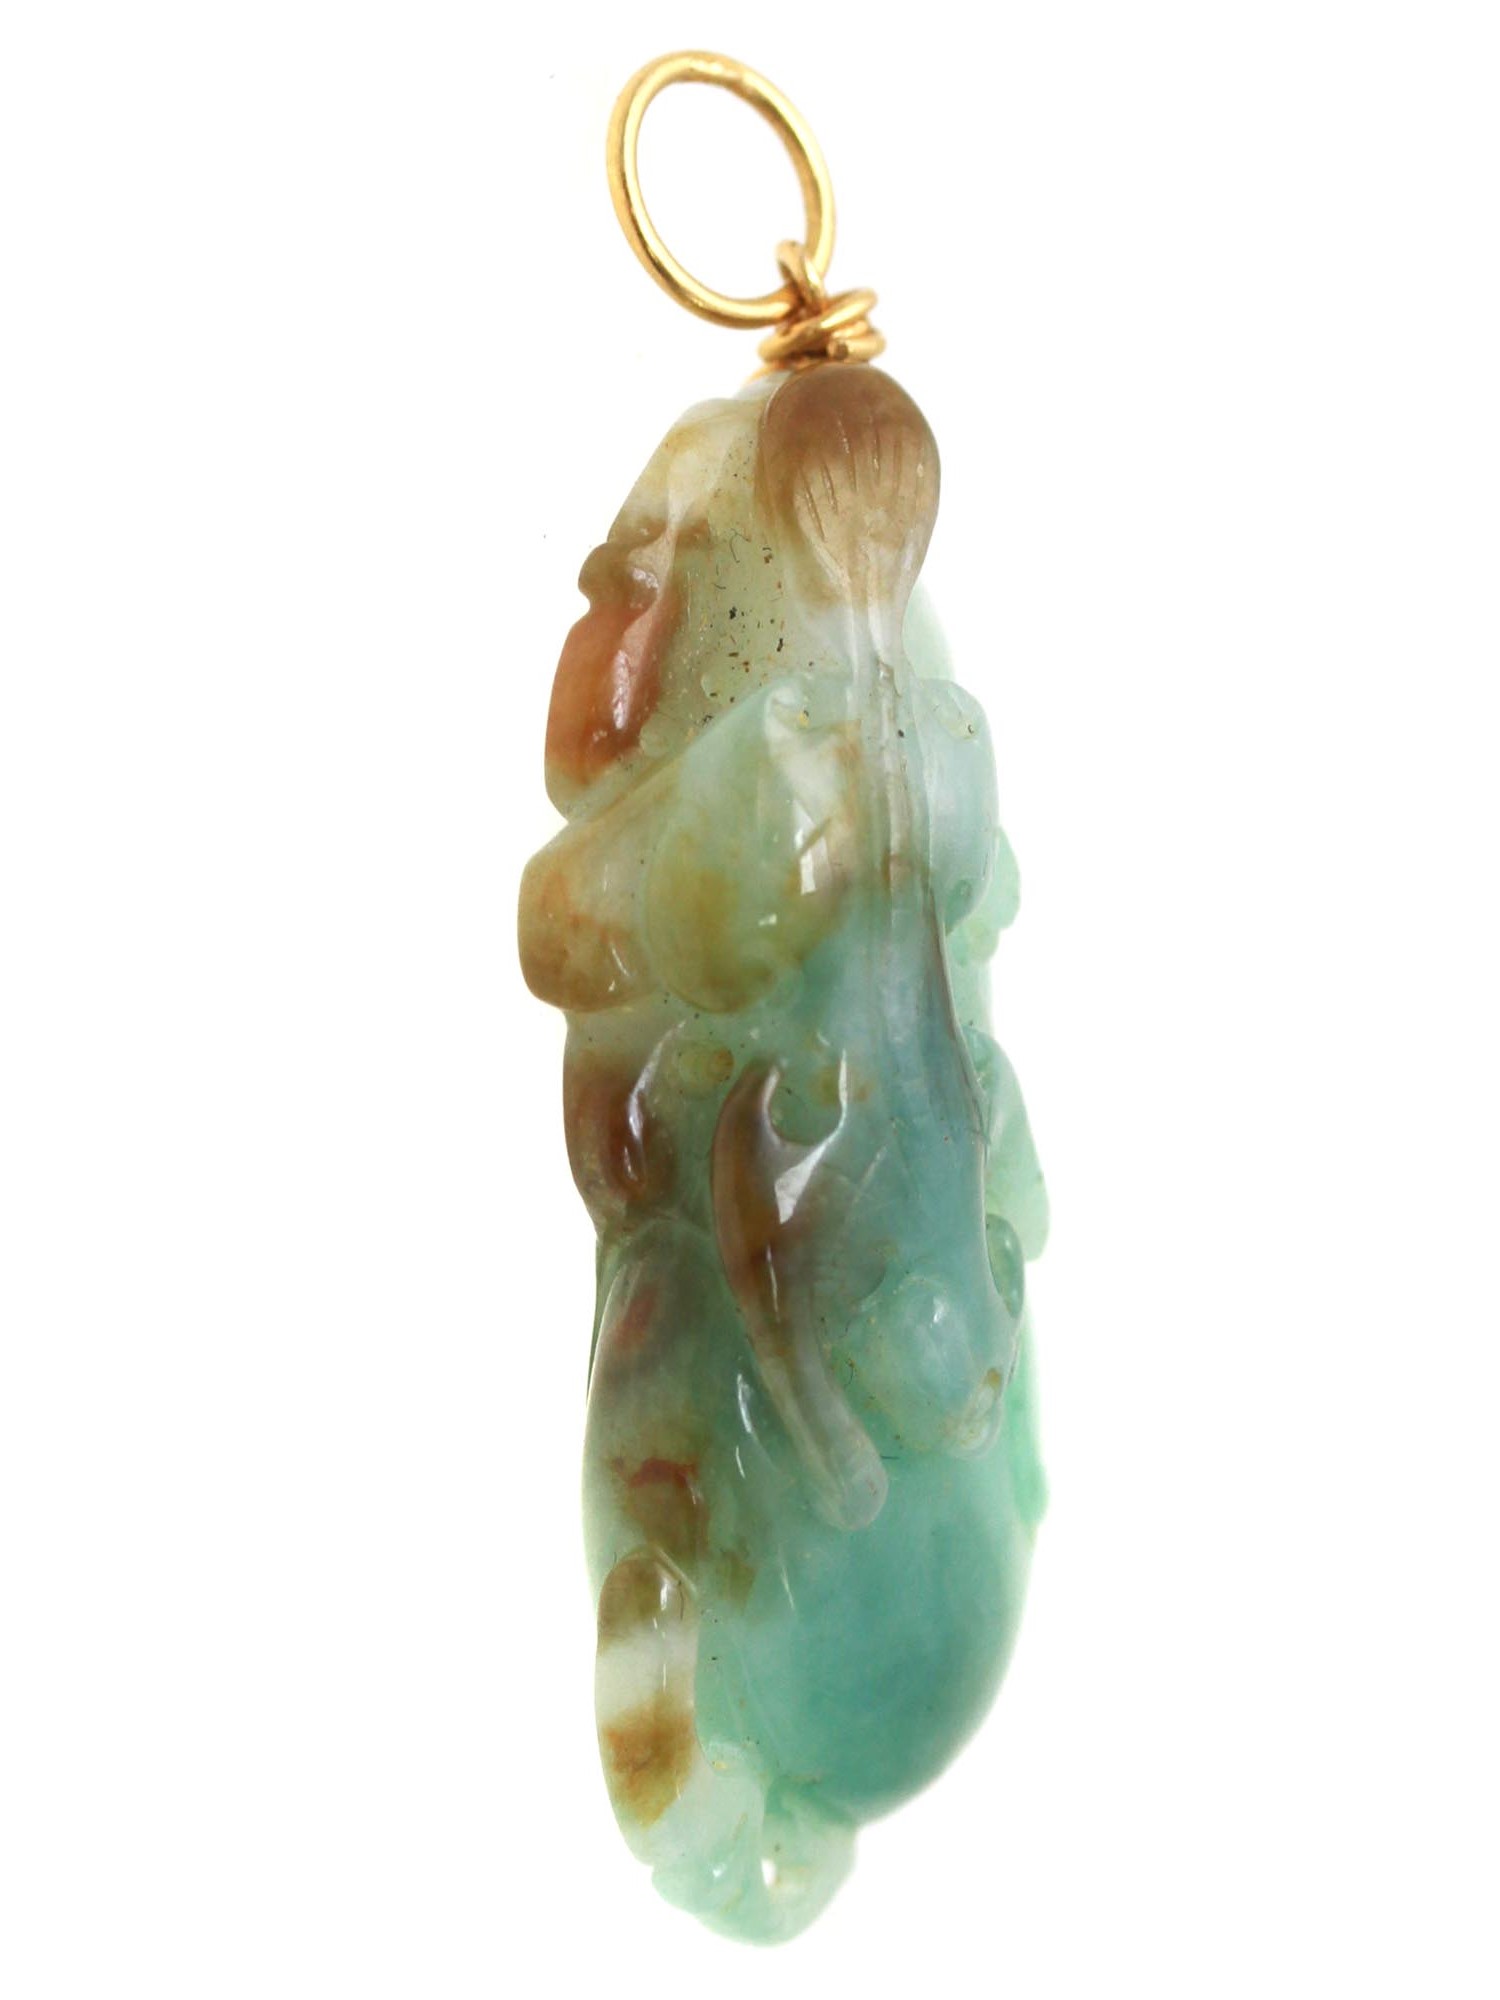 A CHINESE GREEN JADE PENDANT WITH 14K GOLD LOOP PIC-4